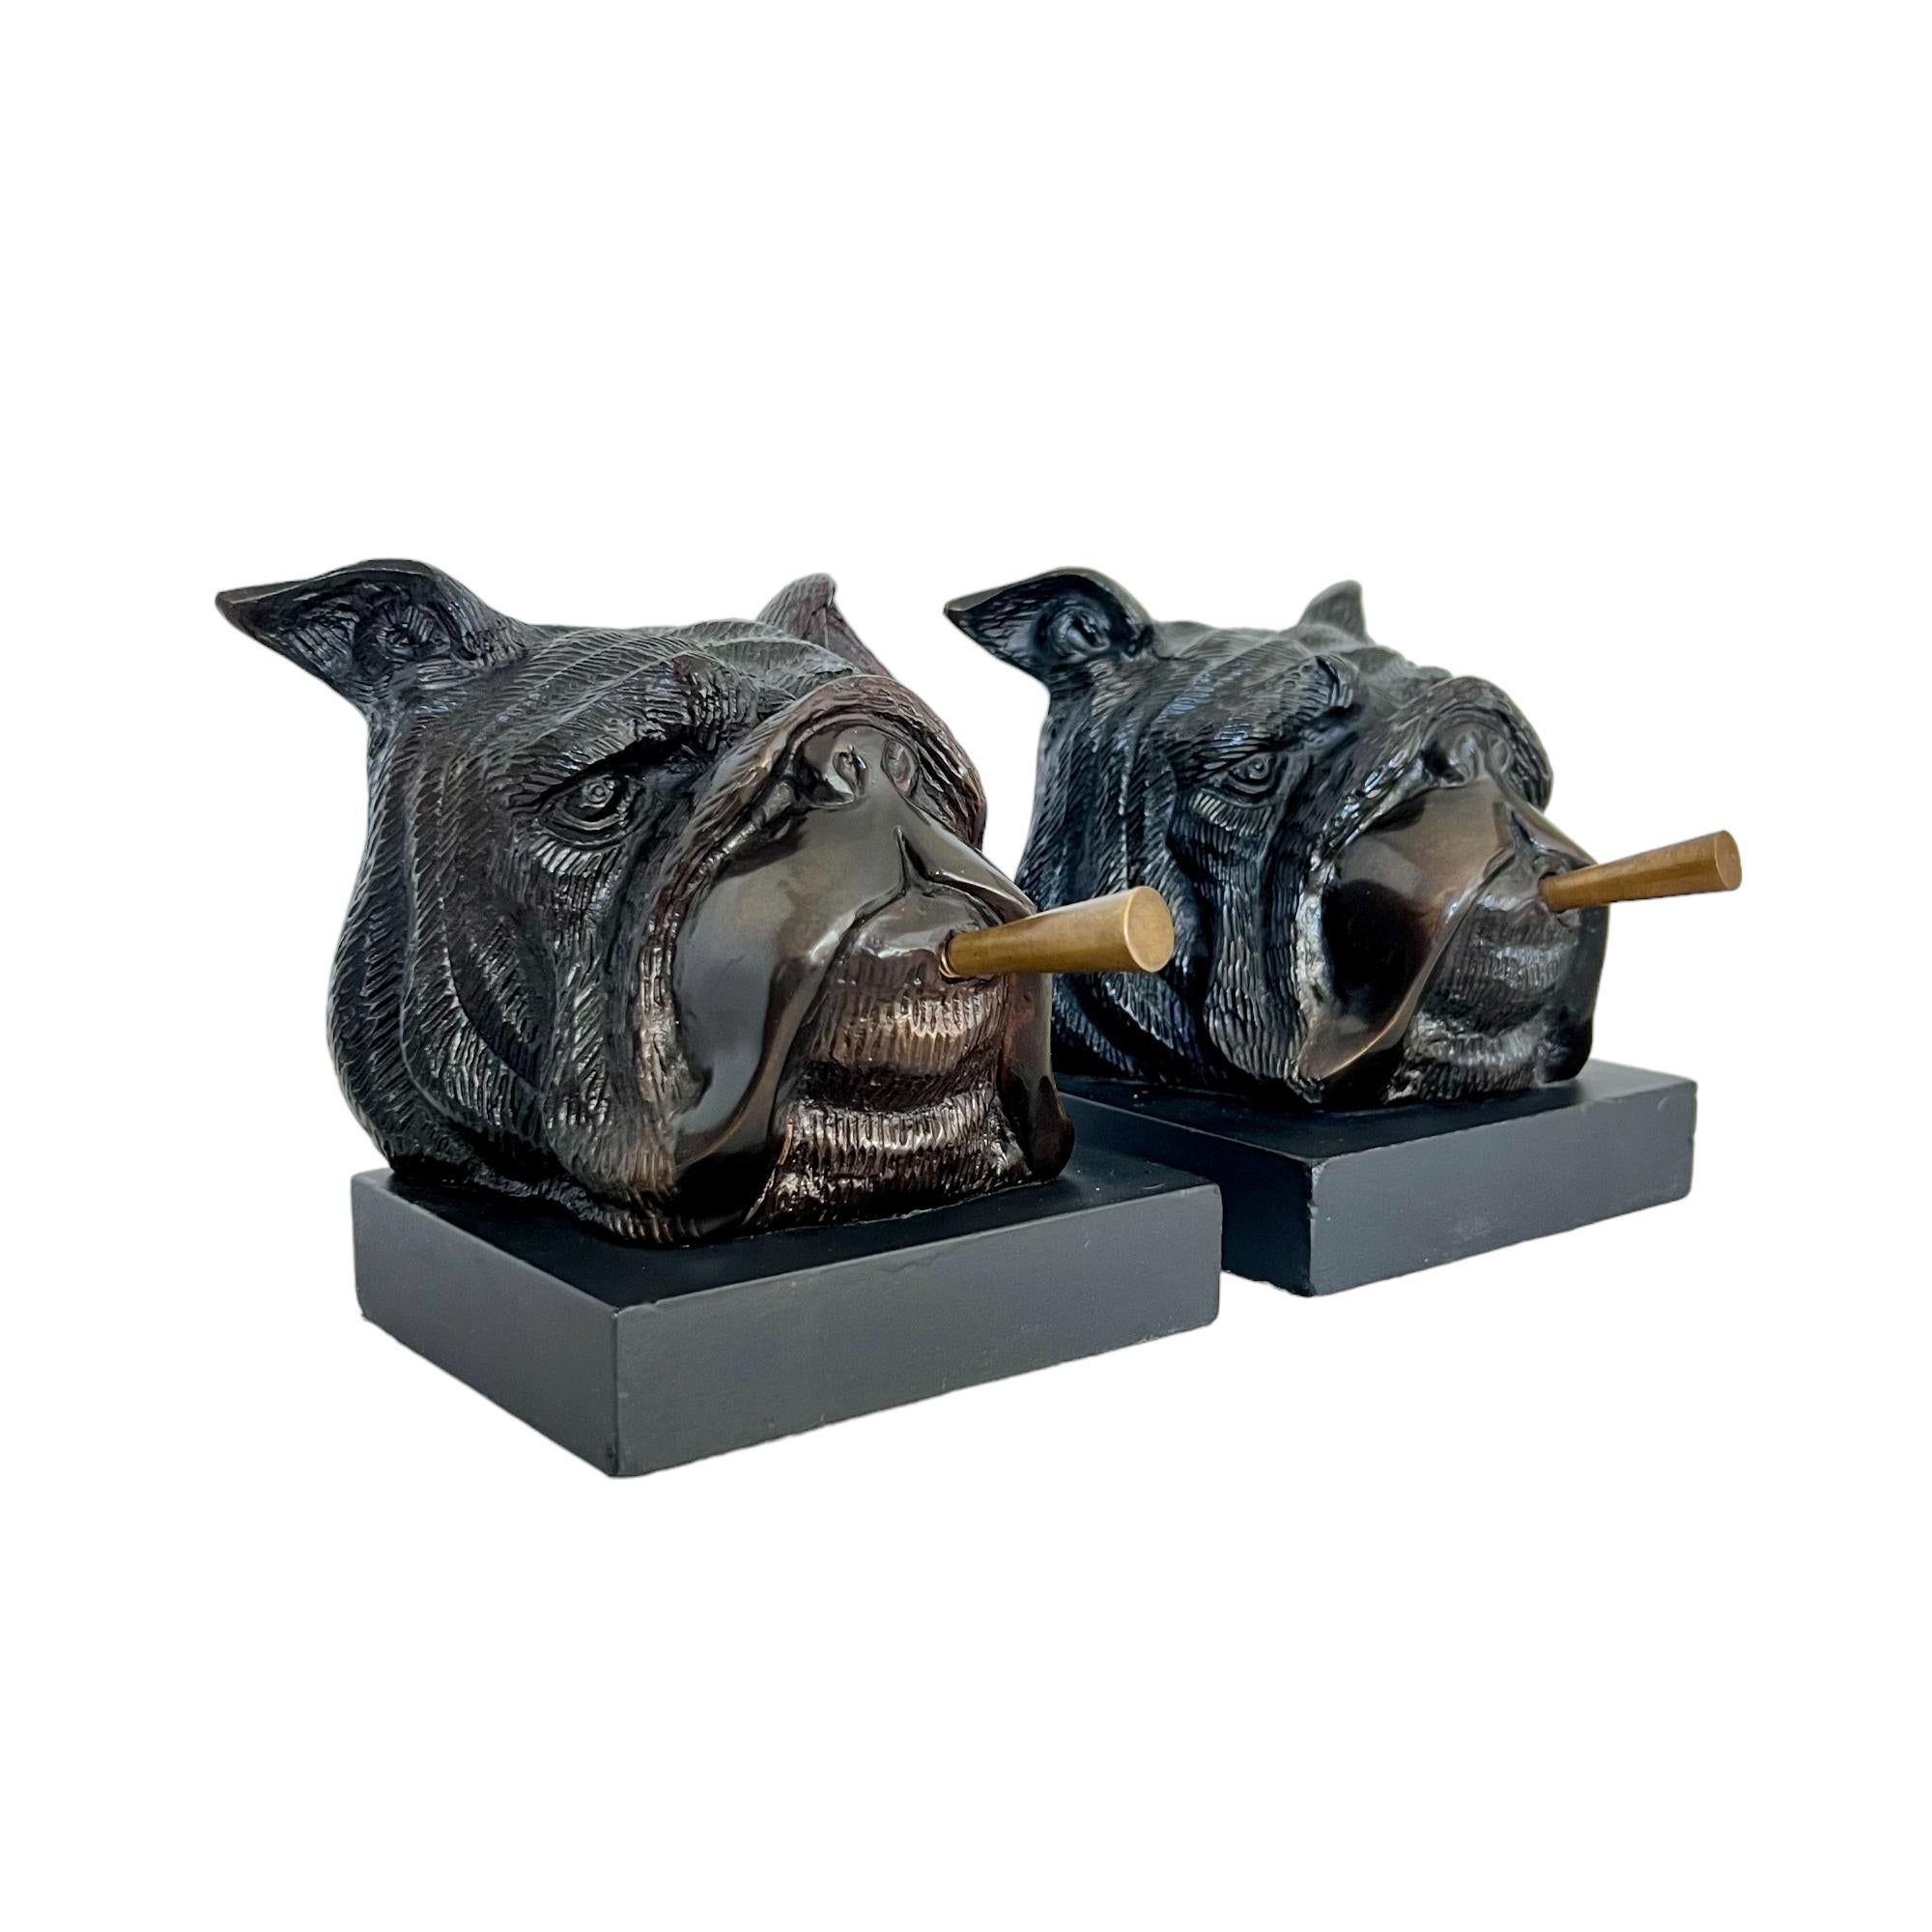 A pair of vintage 1940's smoking English bulldog bookends. Heavy cast iron heads with brass cigars on wooden bases. 

Dimensions: 5.5